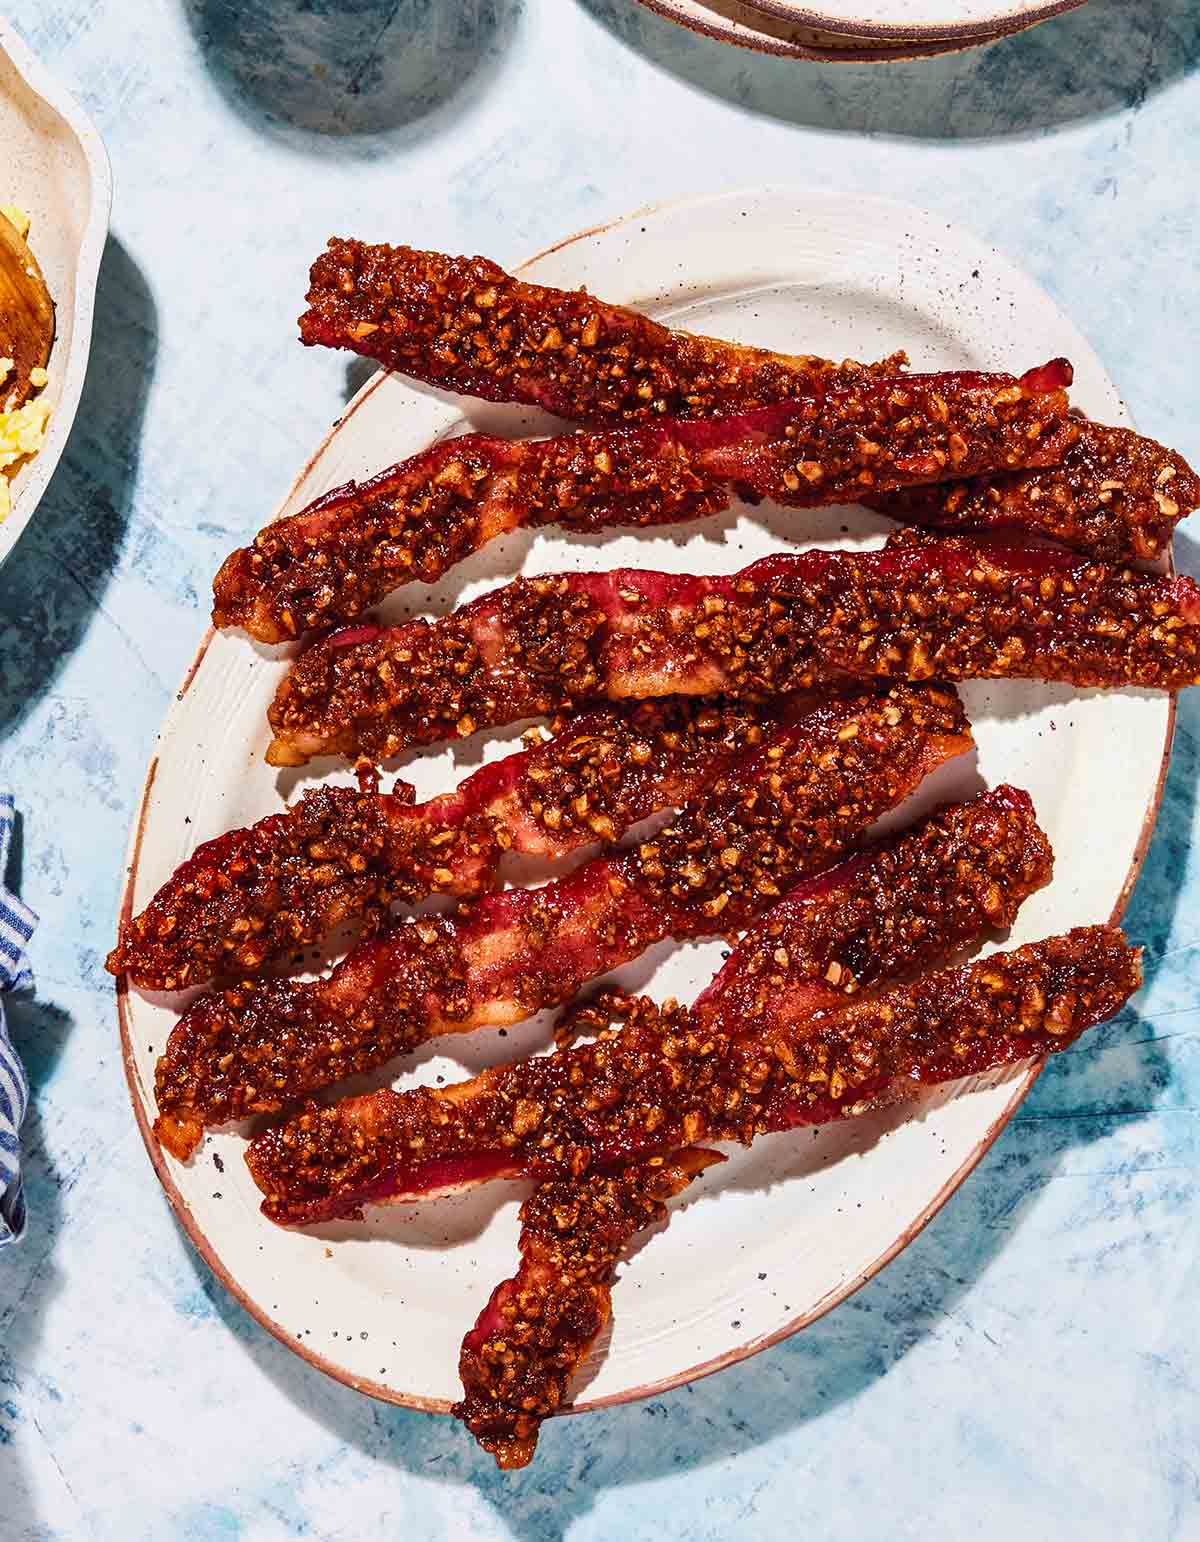 Seven strips of air-fryer pecan-praline candied bacon in a white plate